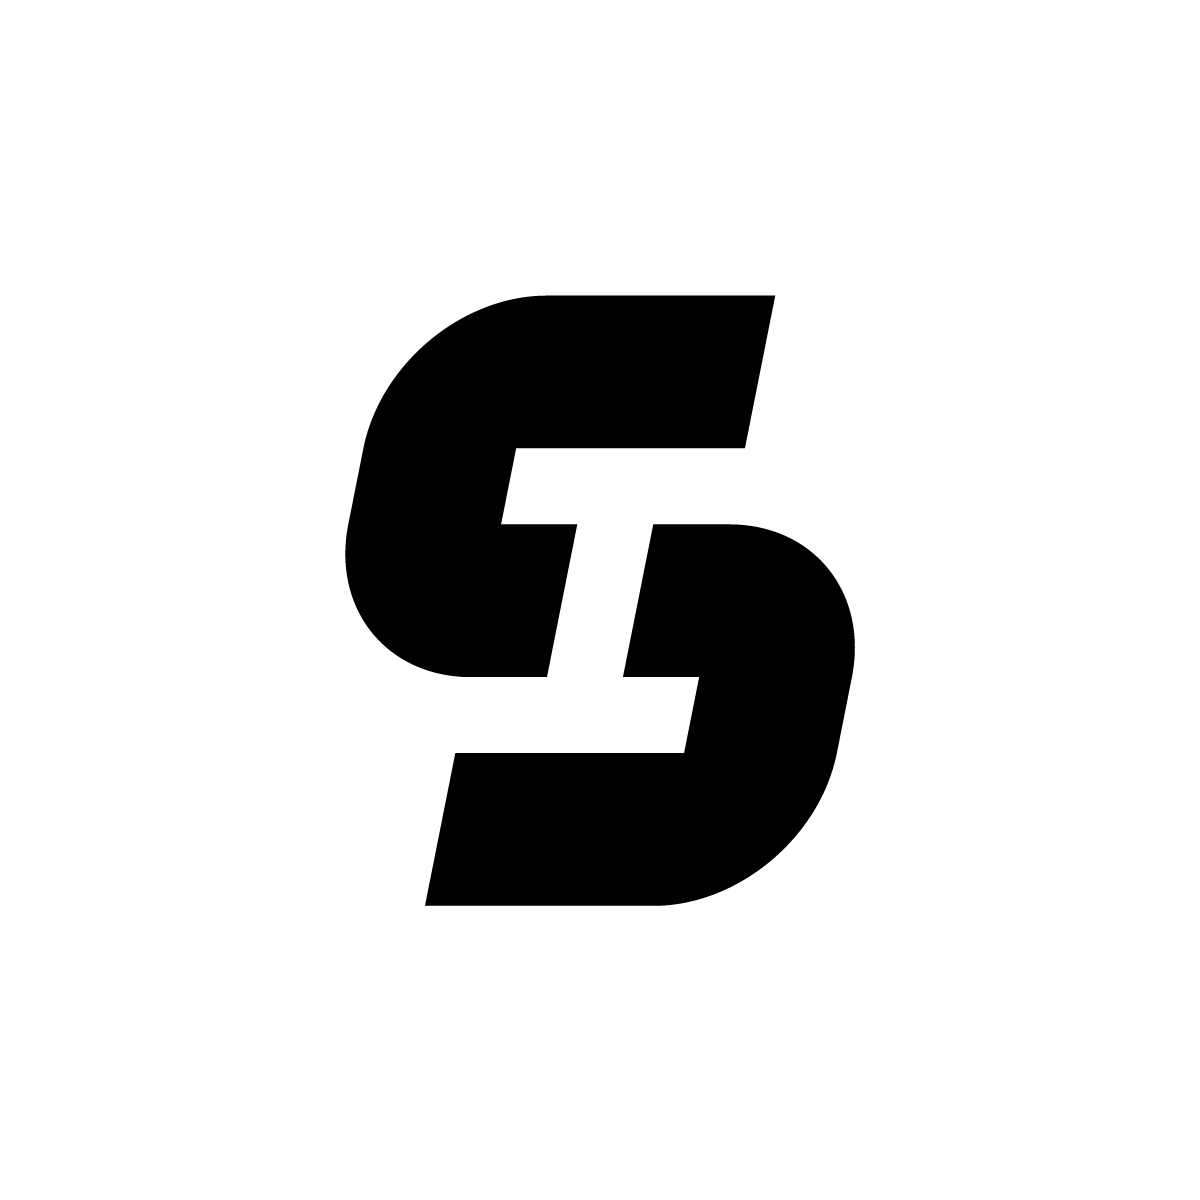 SI Logo: Letter S with I in the negative space